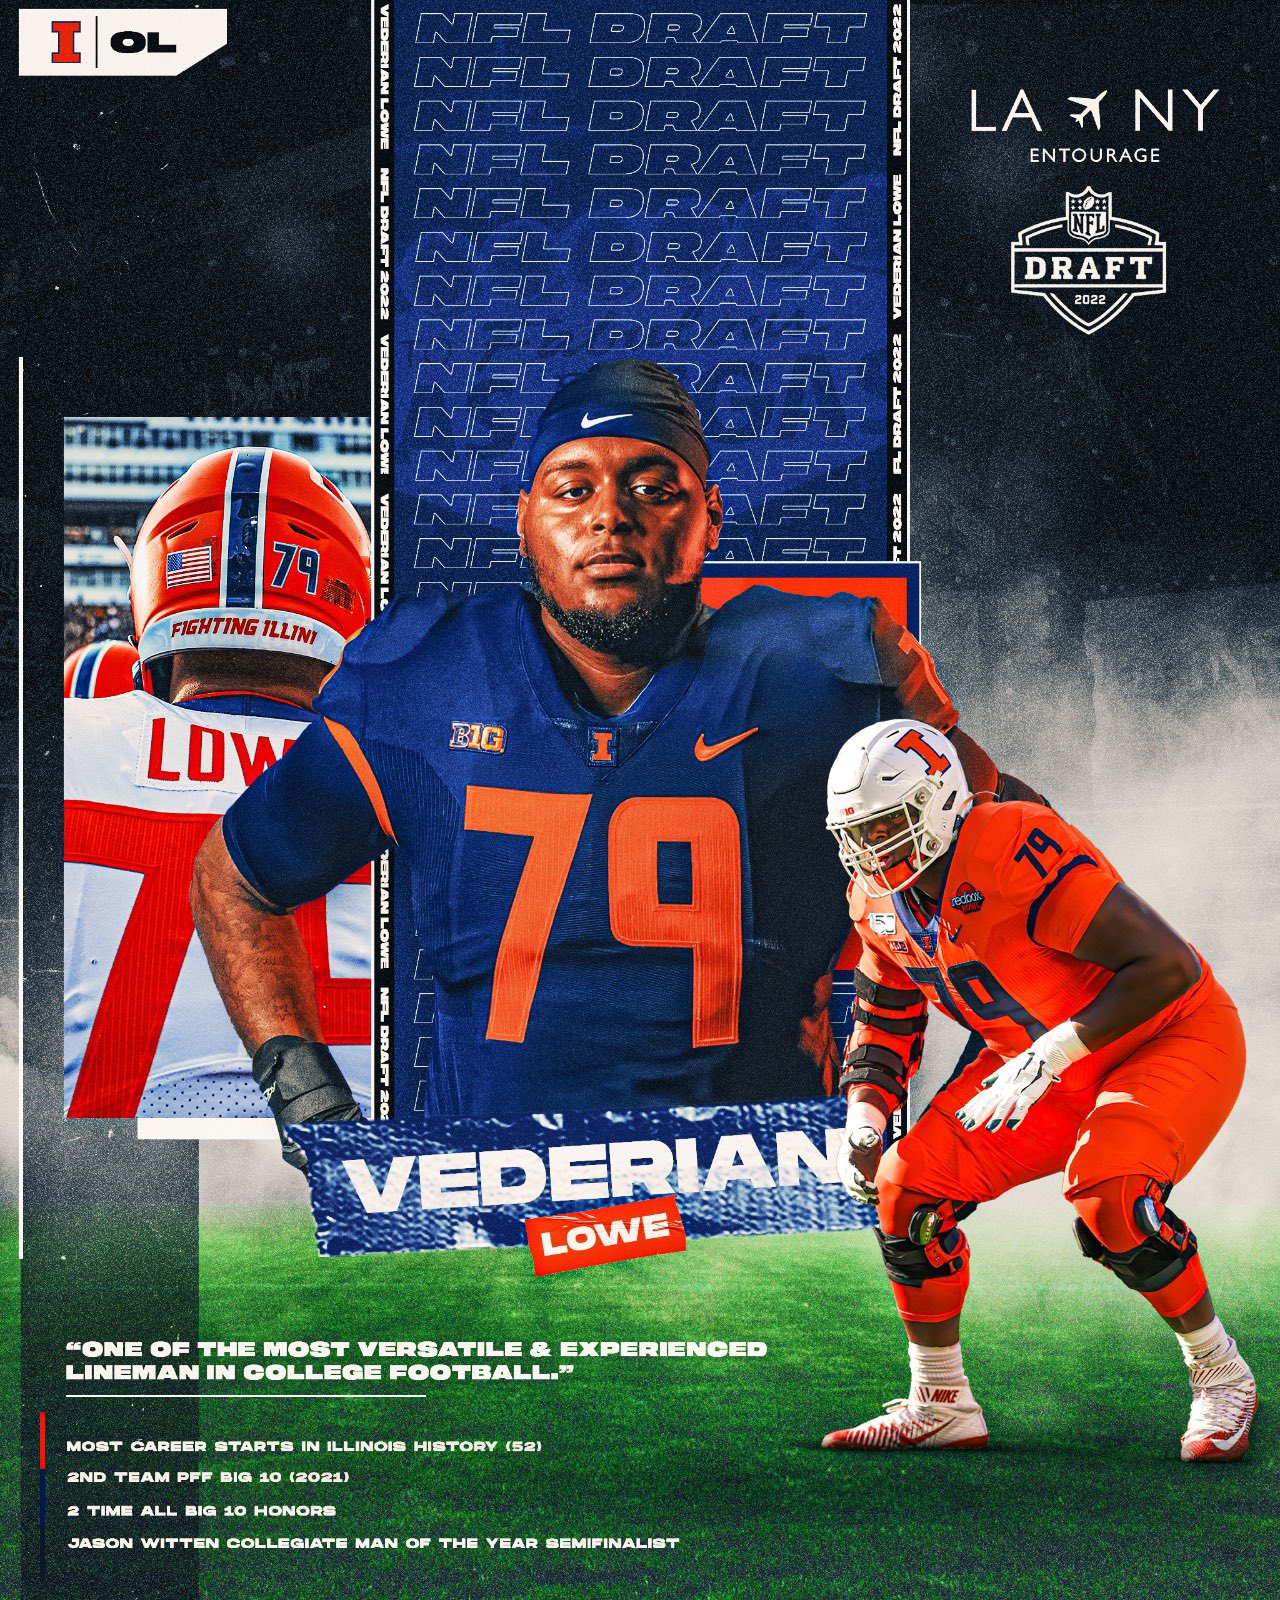 Entourage on Twitter: 'Excited to welcome @VederianLowe to the family! “One  of the most versatile & experienced lineman in college football.” # NFLDraft #HomeTeam  / Twitter